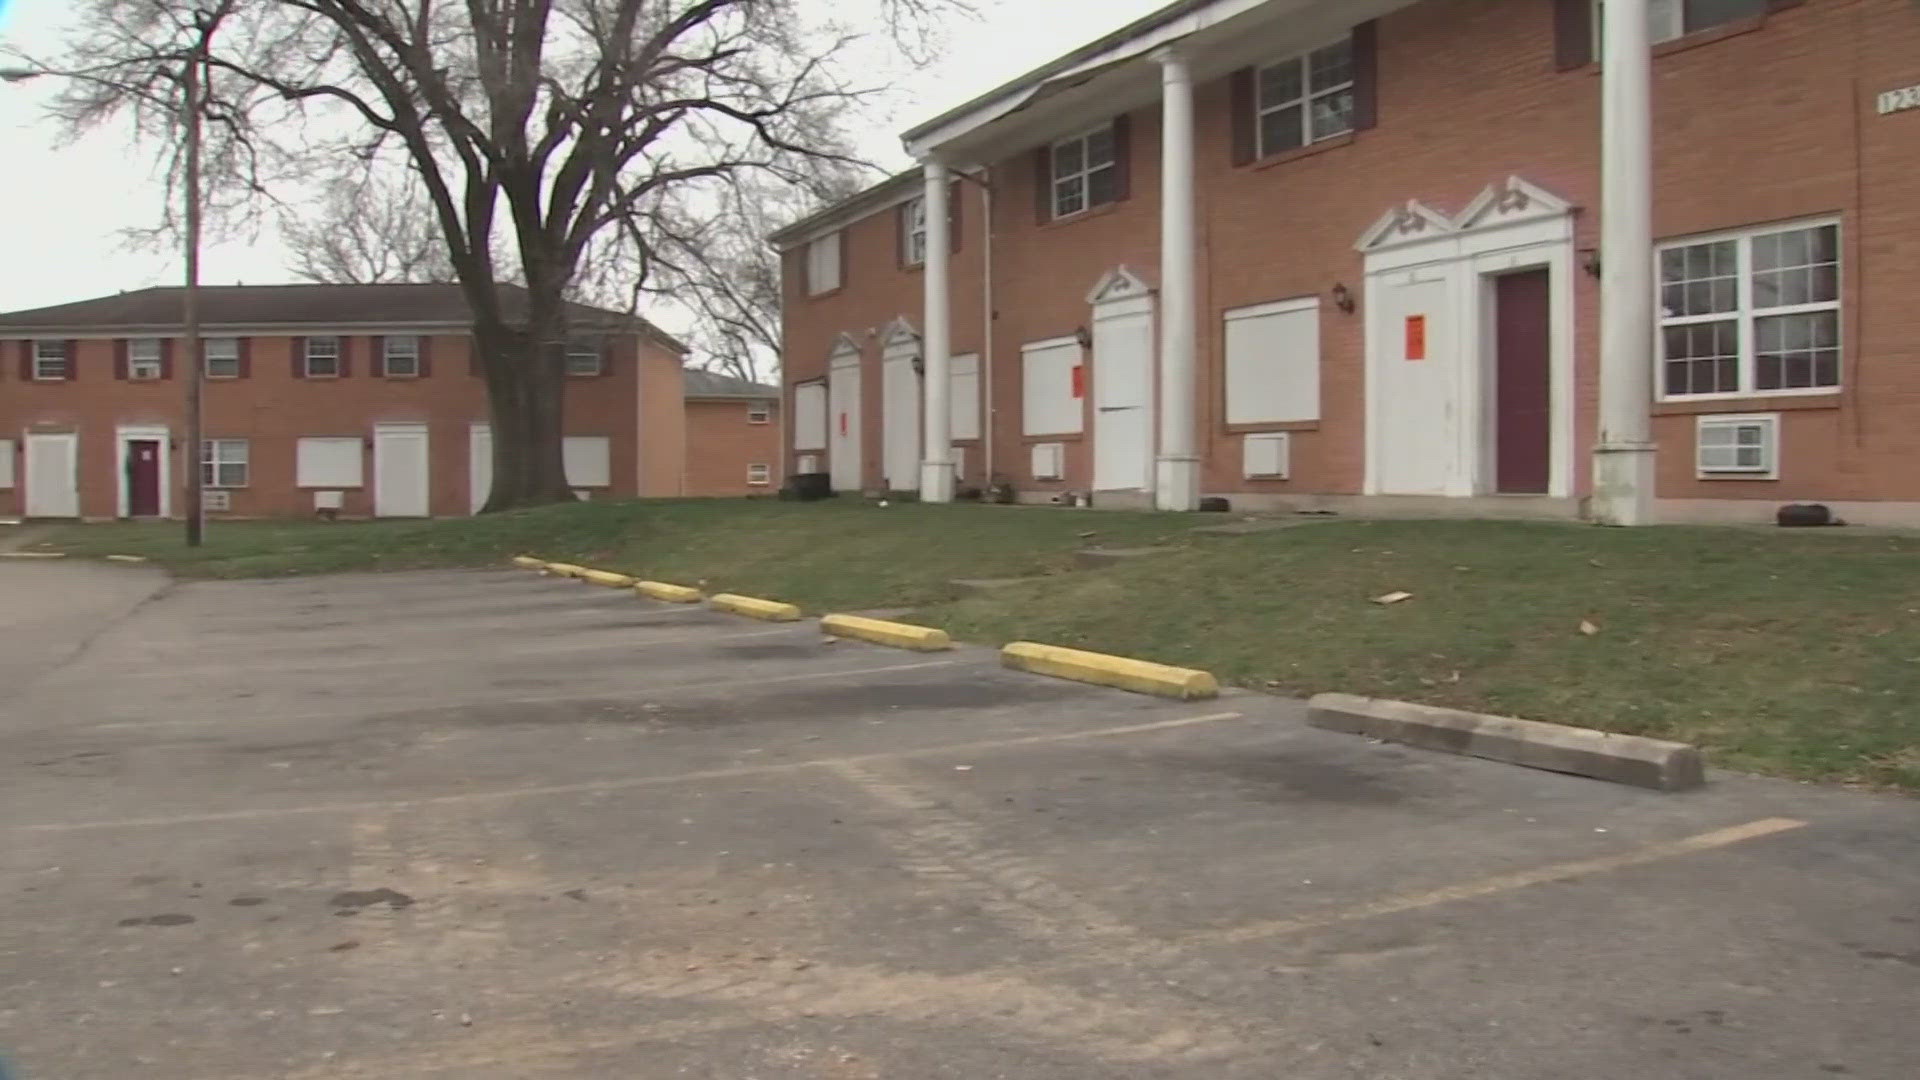 The city of Columbus has set a June 28 deadline for former residents of Colonial Village to find permanent housing.